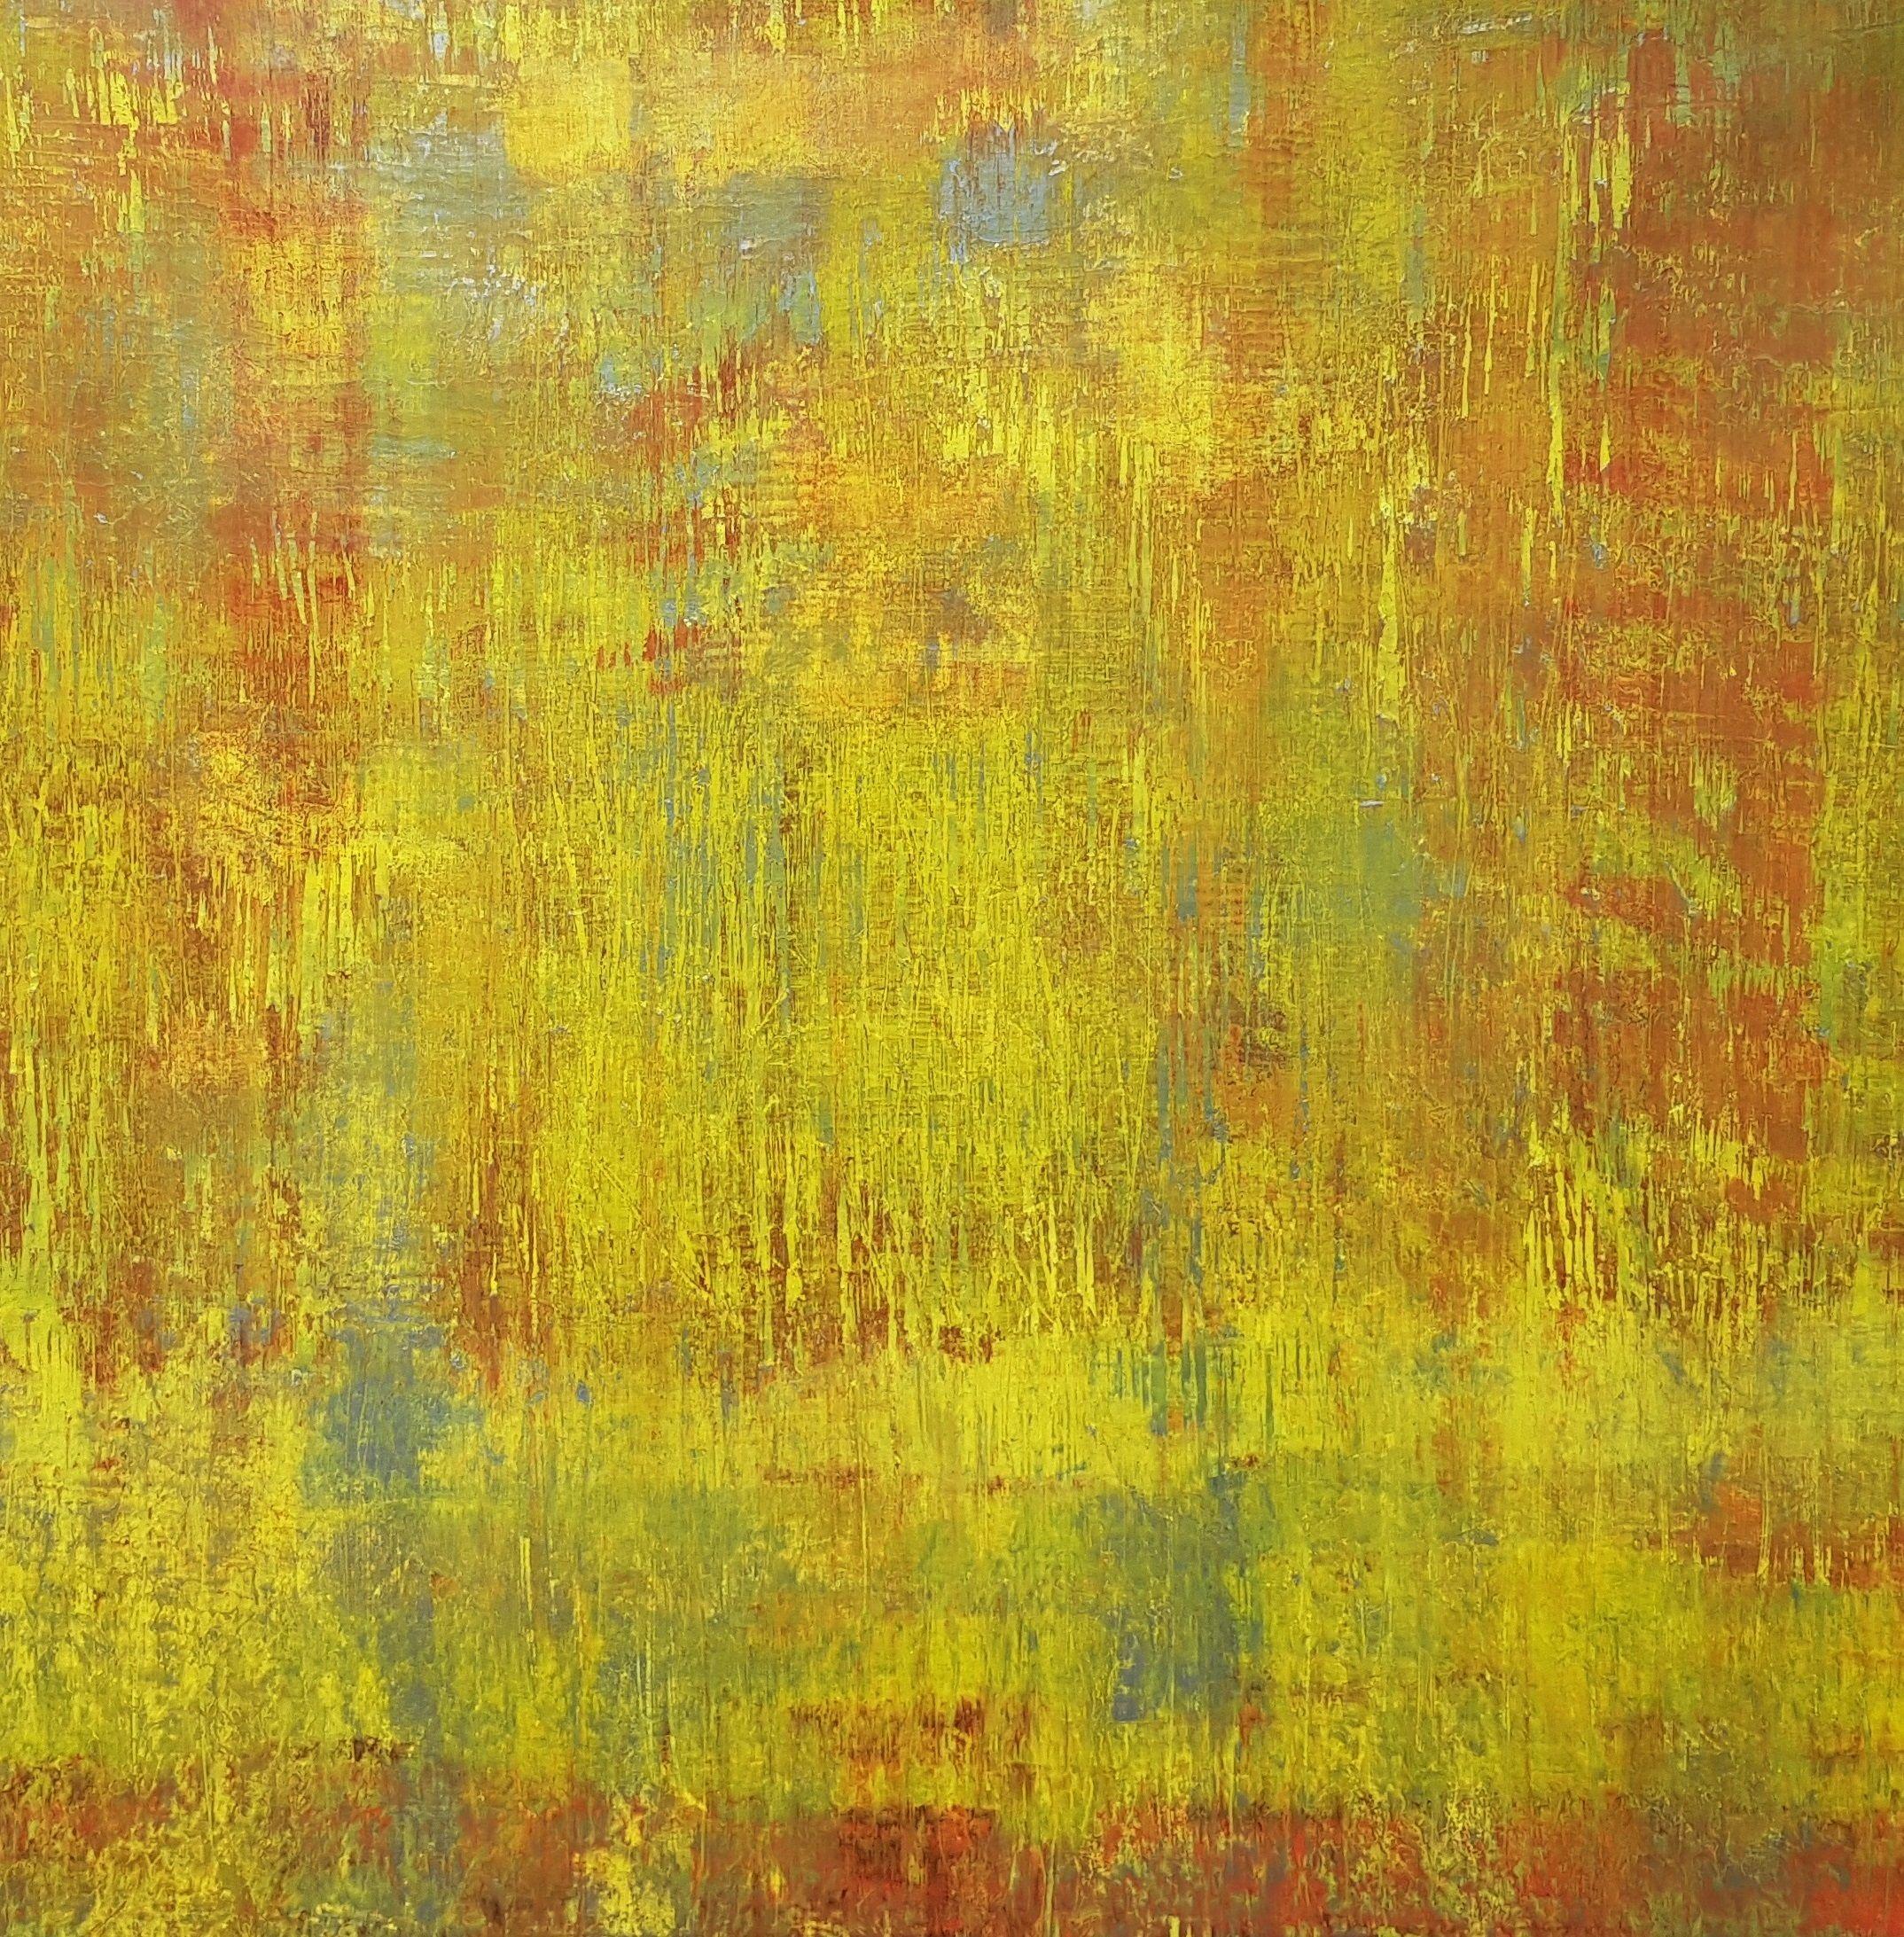 An original one-of-a-kind abstract landscape.  Inspired by the African savanna, dry grass, the sound of wildlife, the heat, the Sun, and Fata Morgana.  Several layers of earthy-toned professional acrylics with a touch of silver color (Fata Morgana)